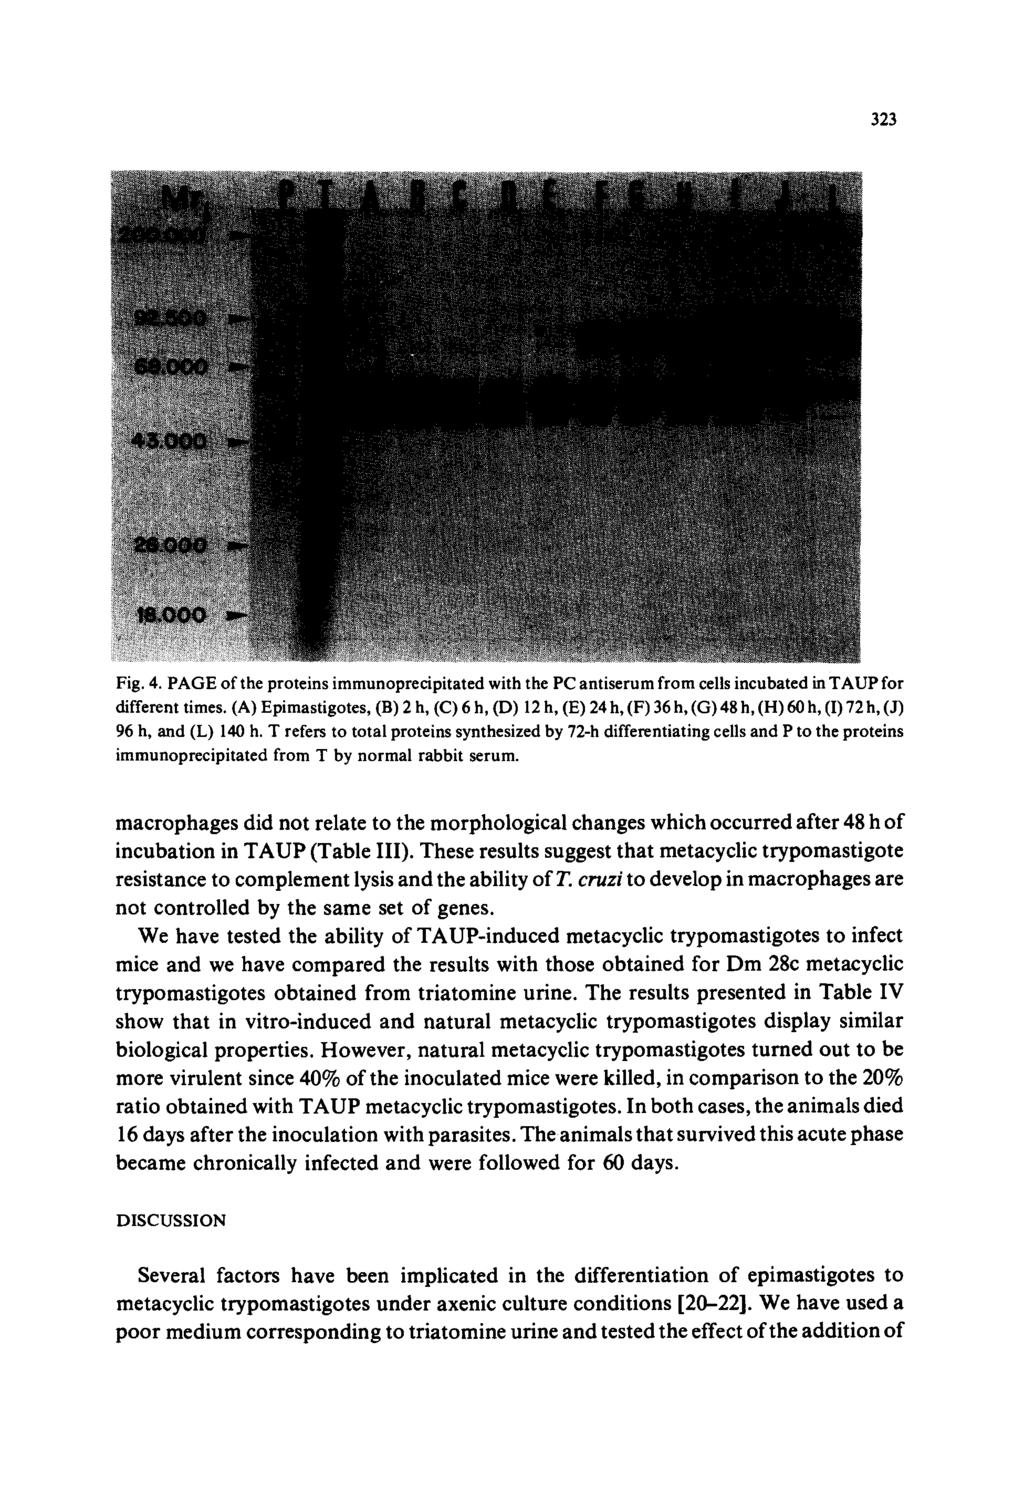 323 Fig. 4. PAGE of the proteins immunoprecipitated with the PC antiserum from cells incubated in TAUP for different times.